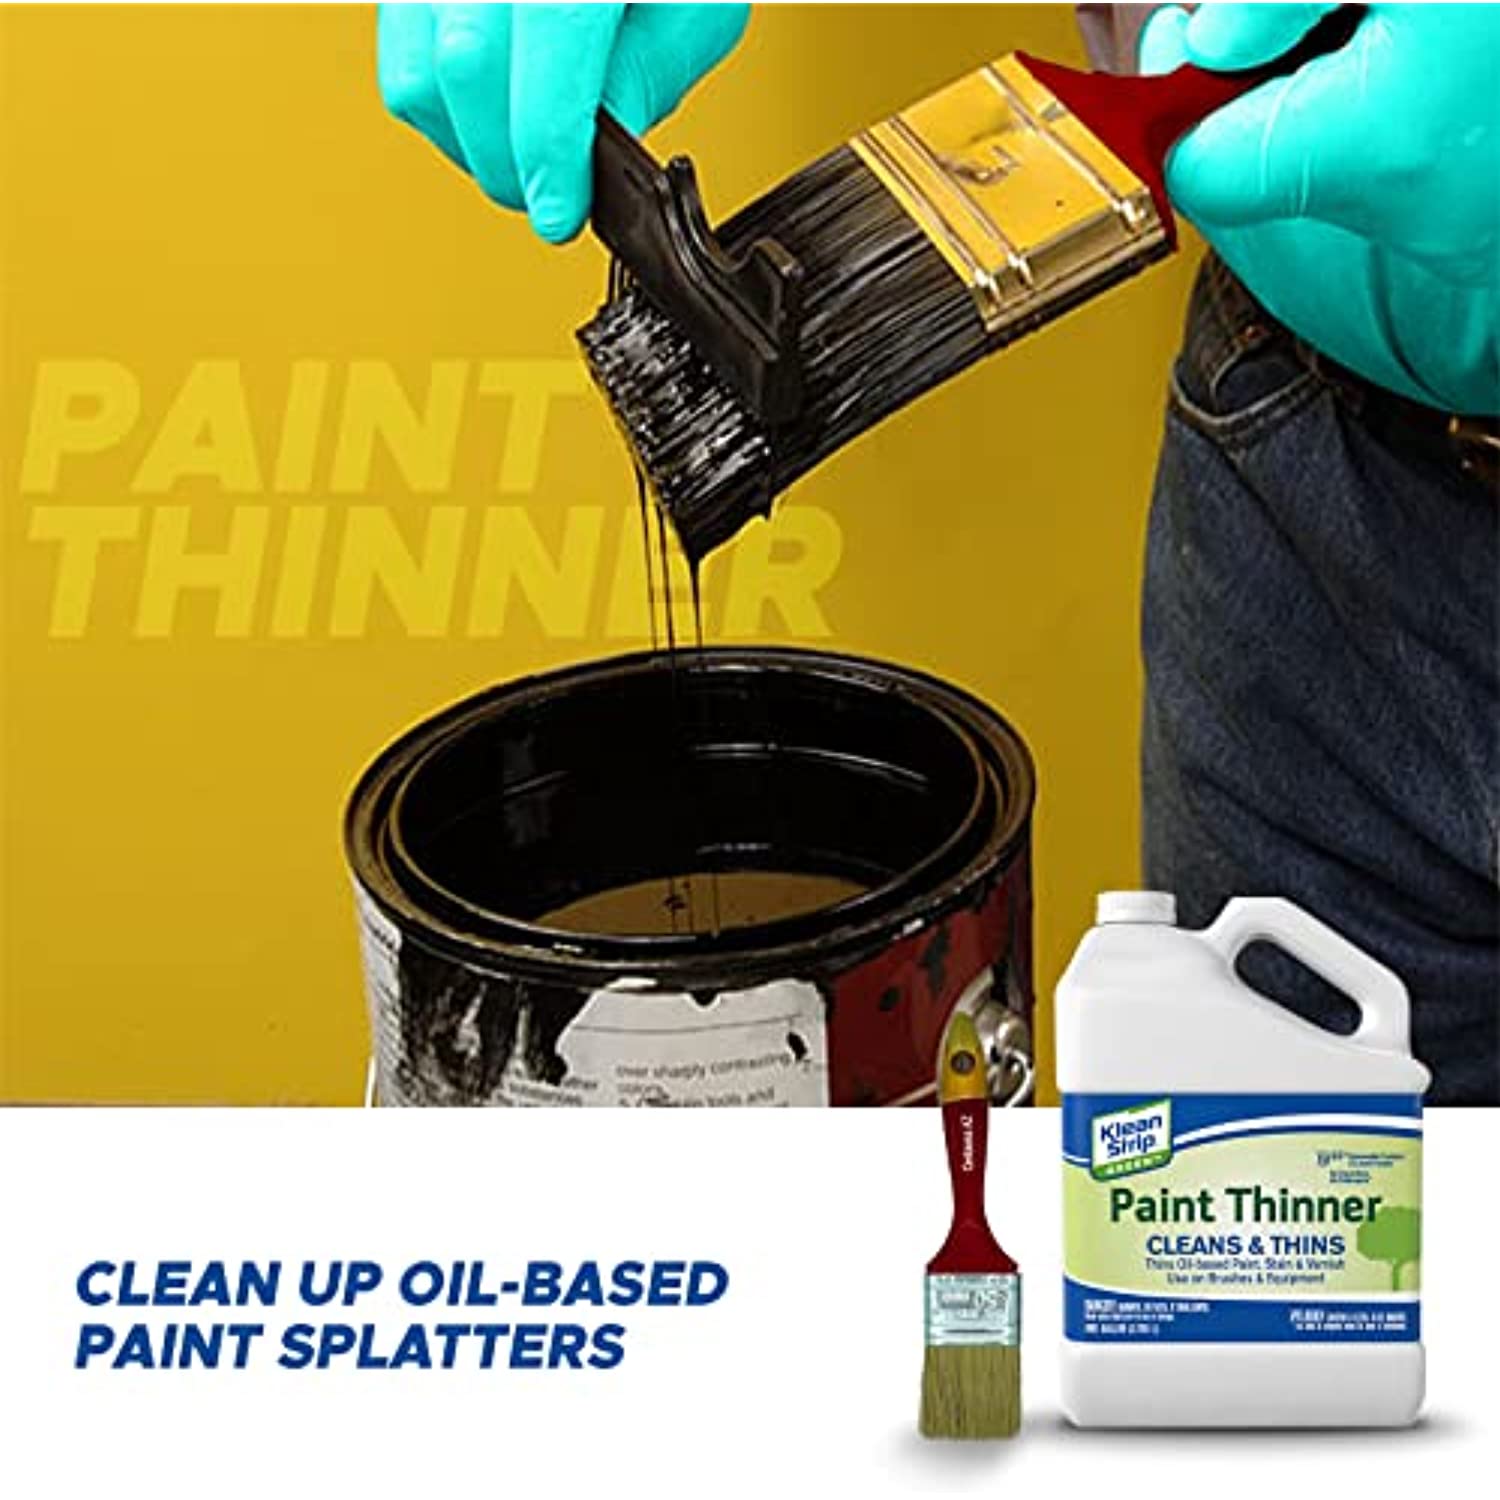 Klean-Strip Paint Thinner  Rockler Woodworking and Hardware